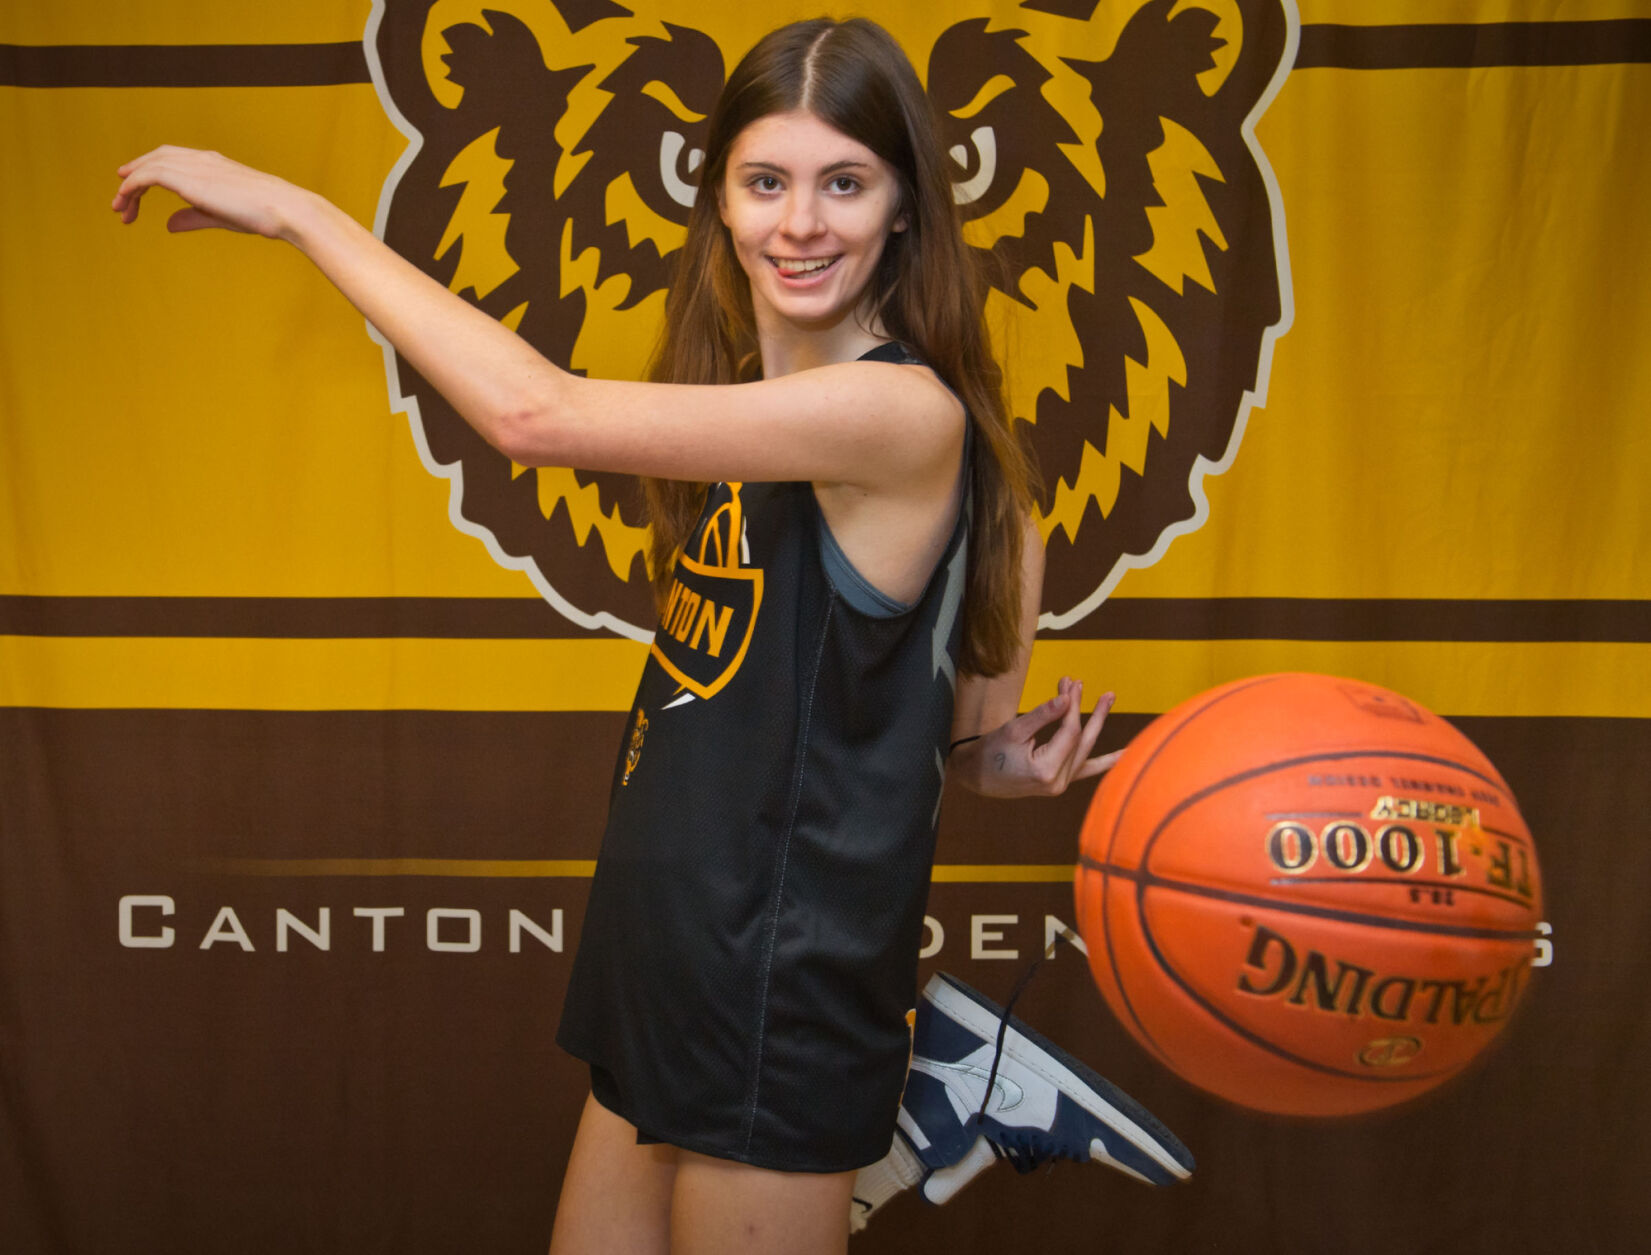 High school girls basketball Hoy carries on Golden Bears tradition as emerging leader in the NAC High School Sports nny360